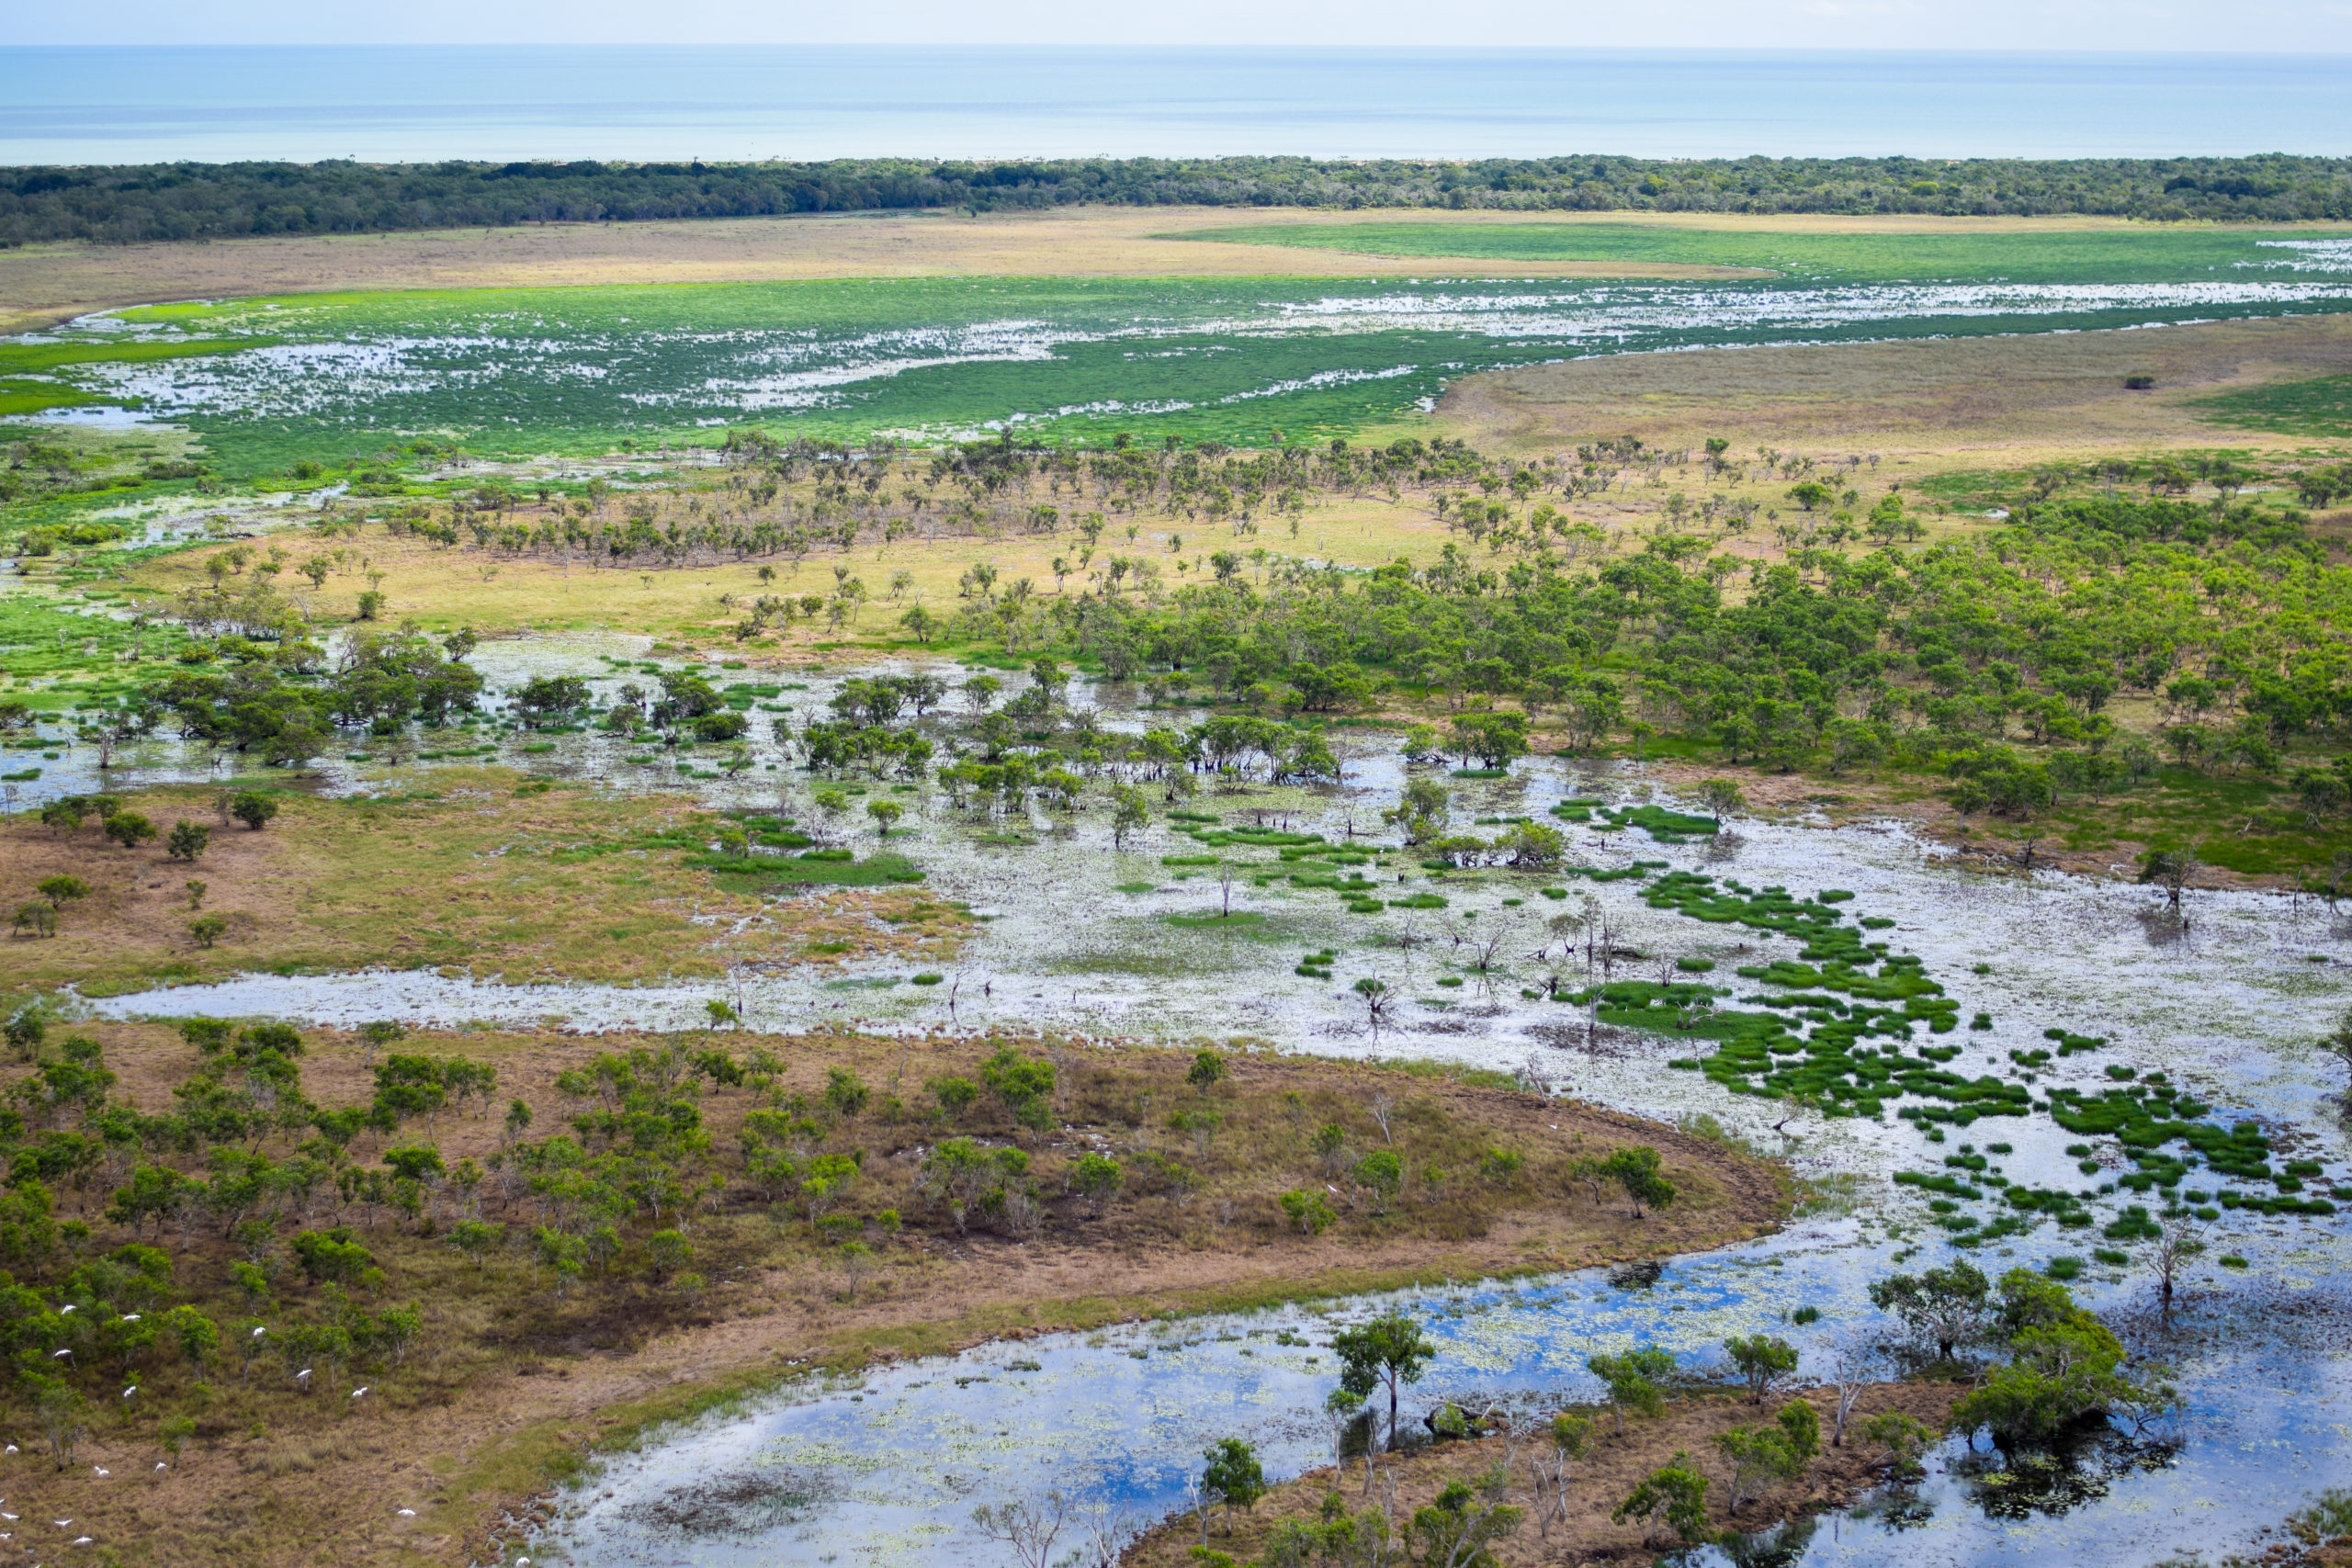 Looking towards the coastline over a Cape York floodplain in the wet season shows a mostly flooded landscape.